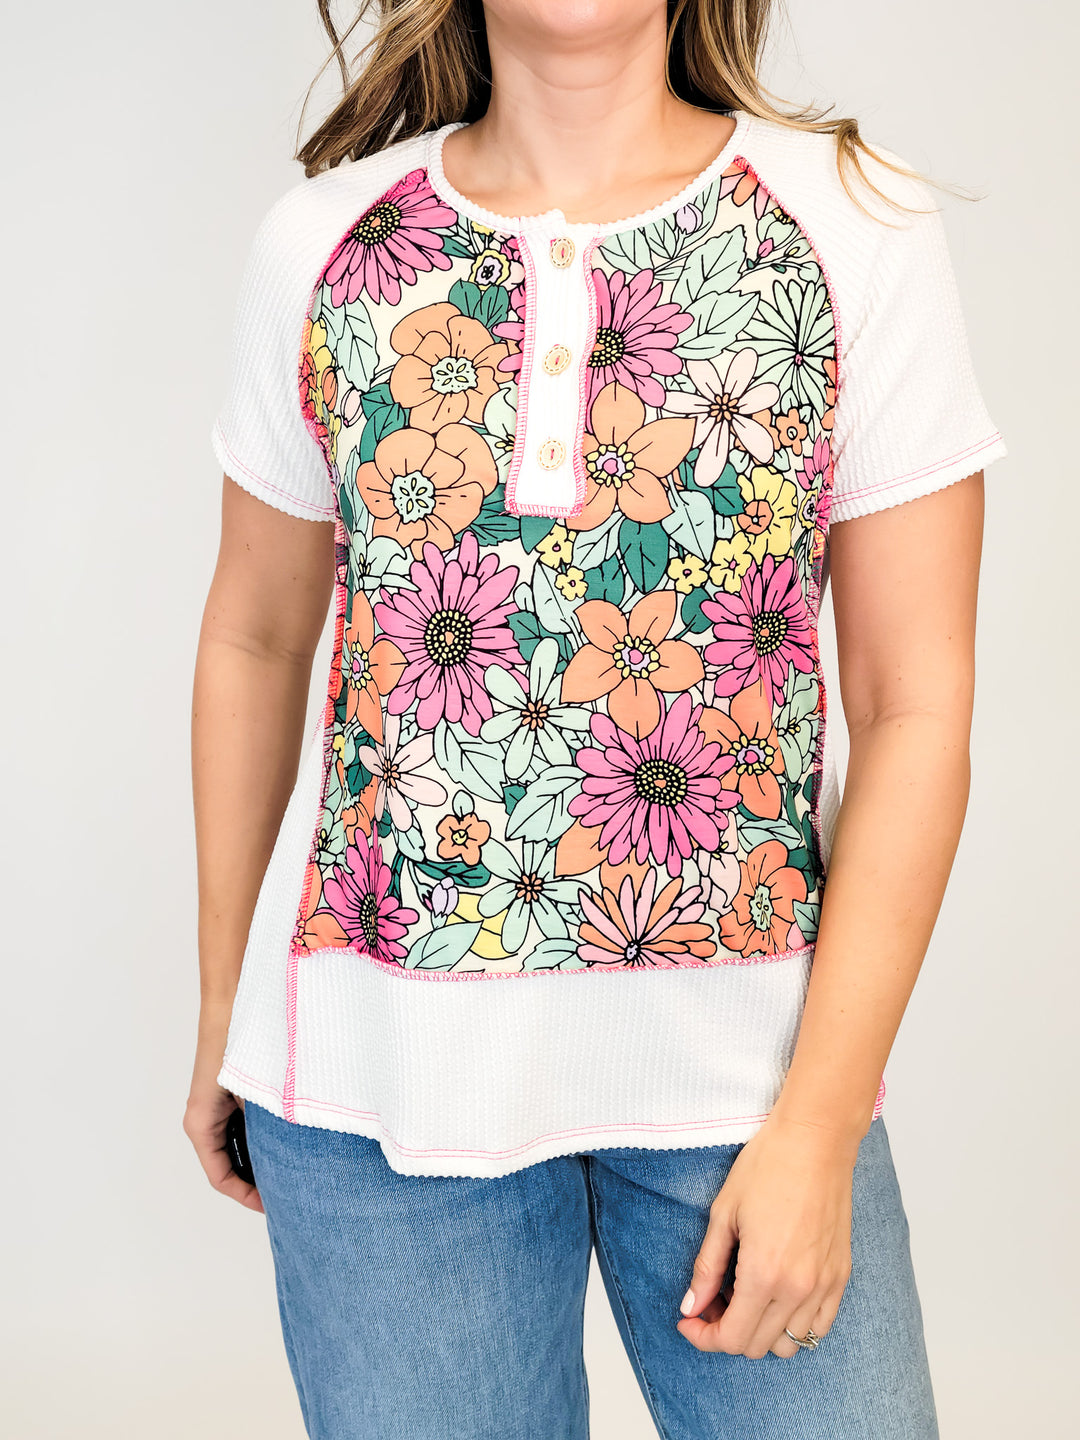 SHORT SLEEVE FLORAL TOP W/BUTTON DETAIL - IVORY/PINK